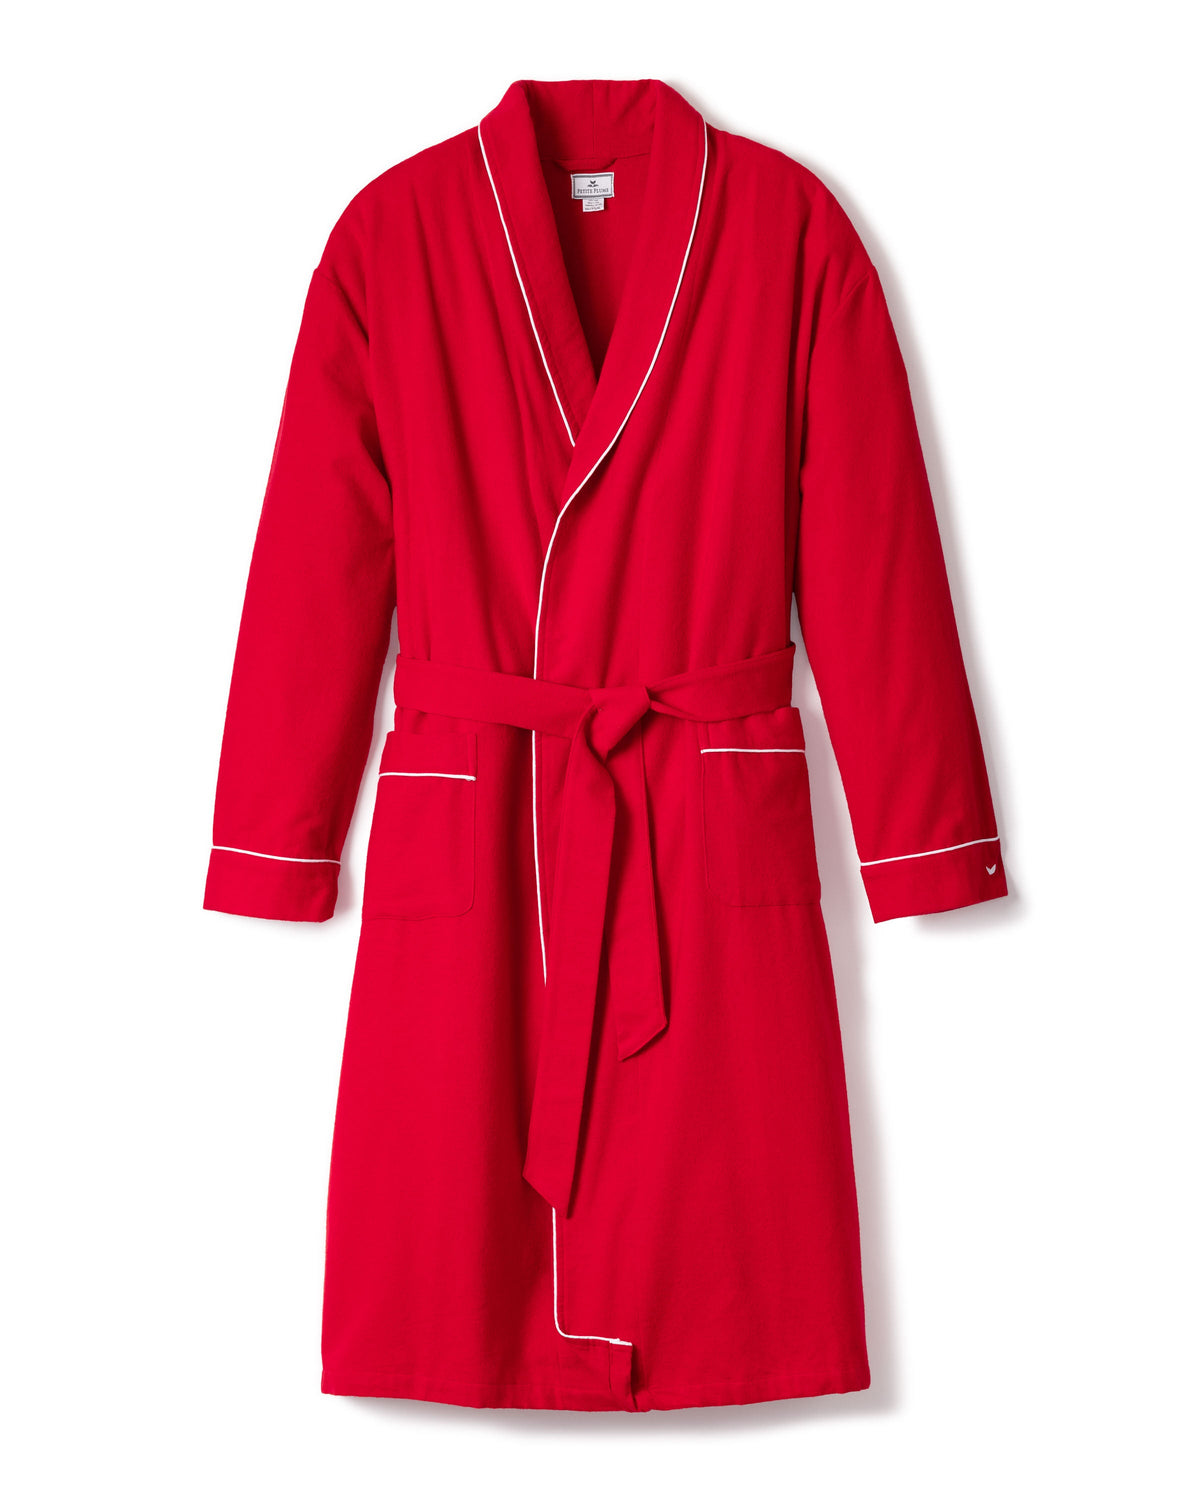 Men’s Red Flannel Robe with White Piping